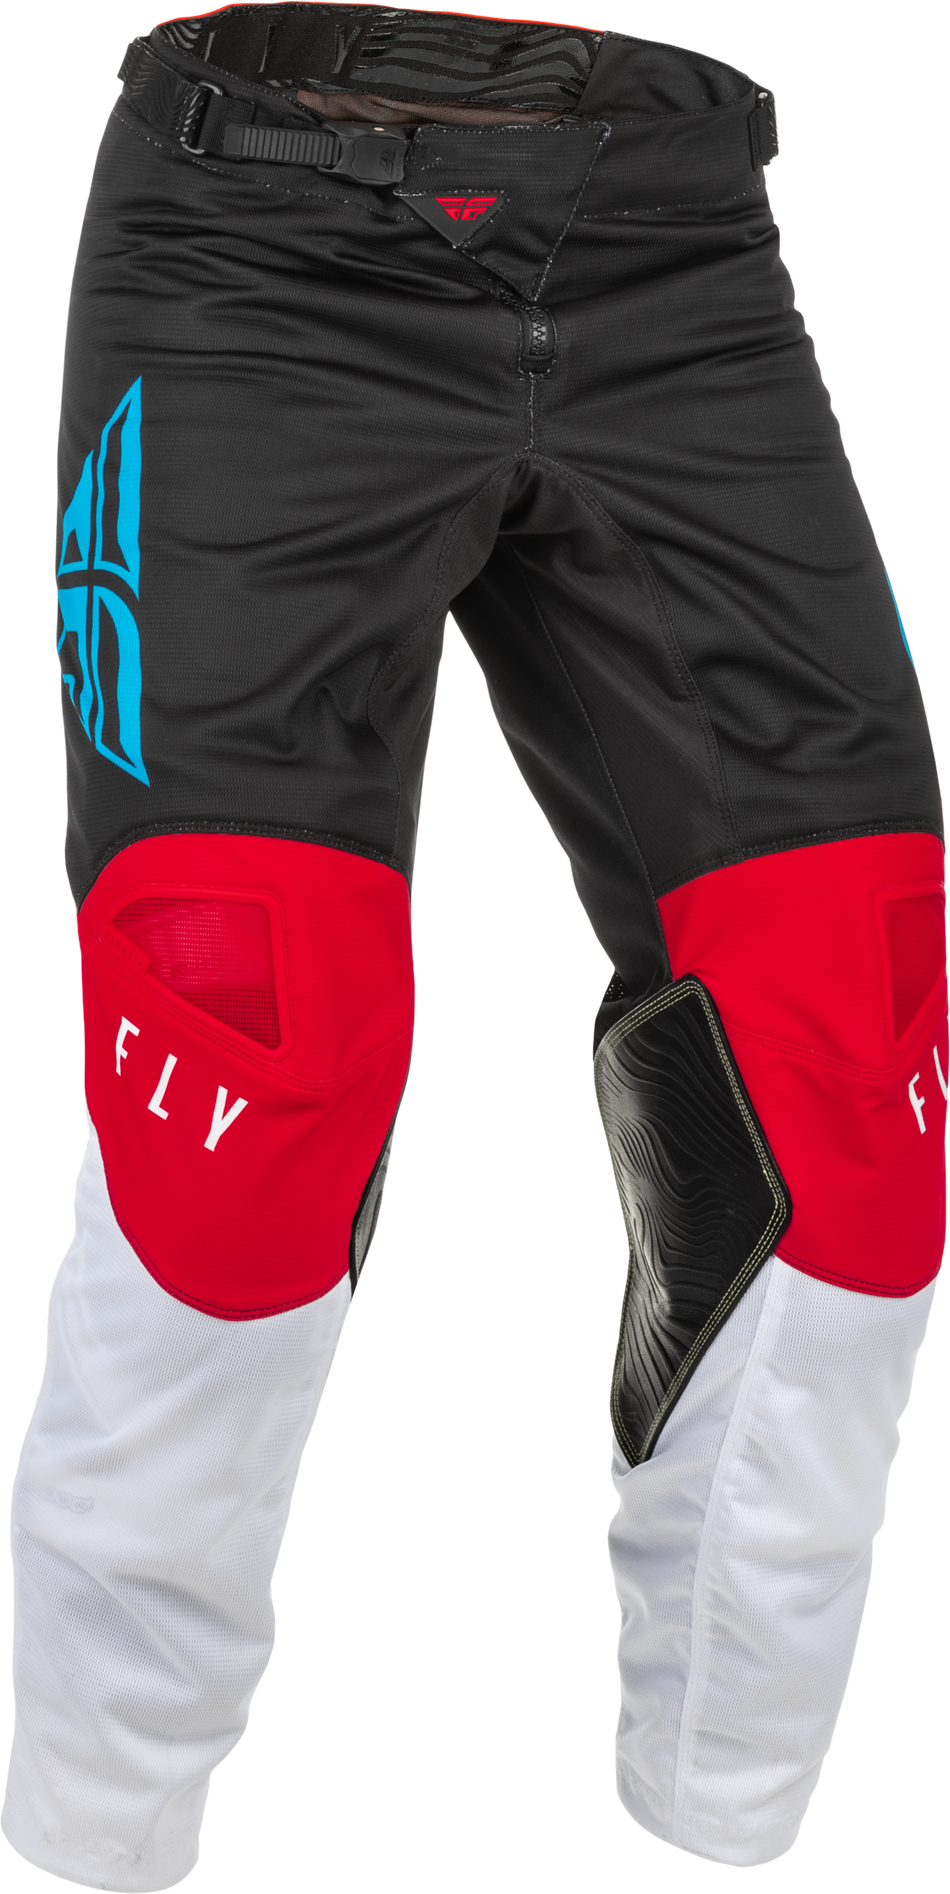 FLY RACING Kinetic Mesh Pants Red/White/Blue Sz 30 375-32430